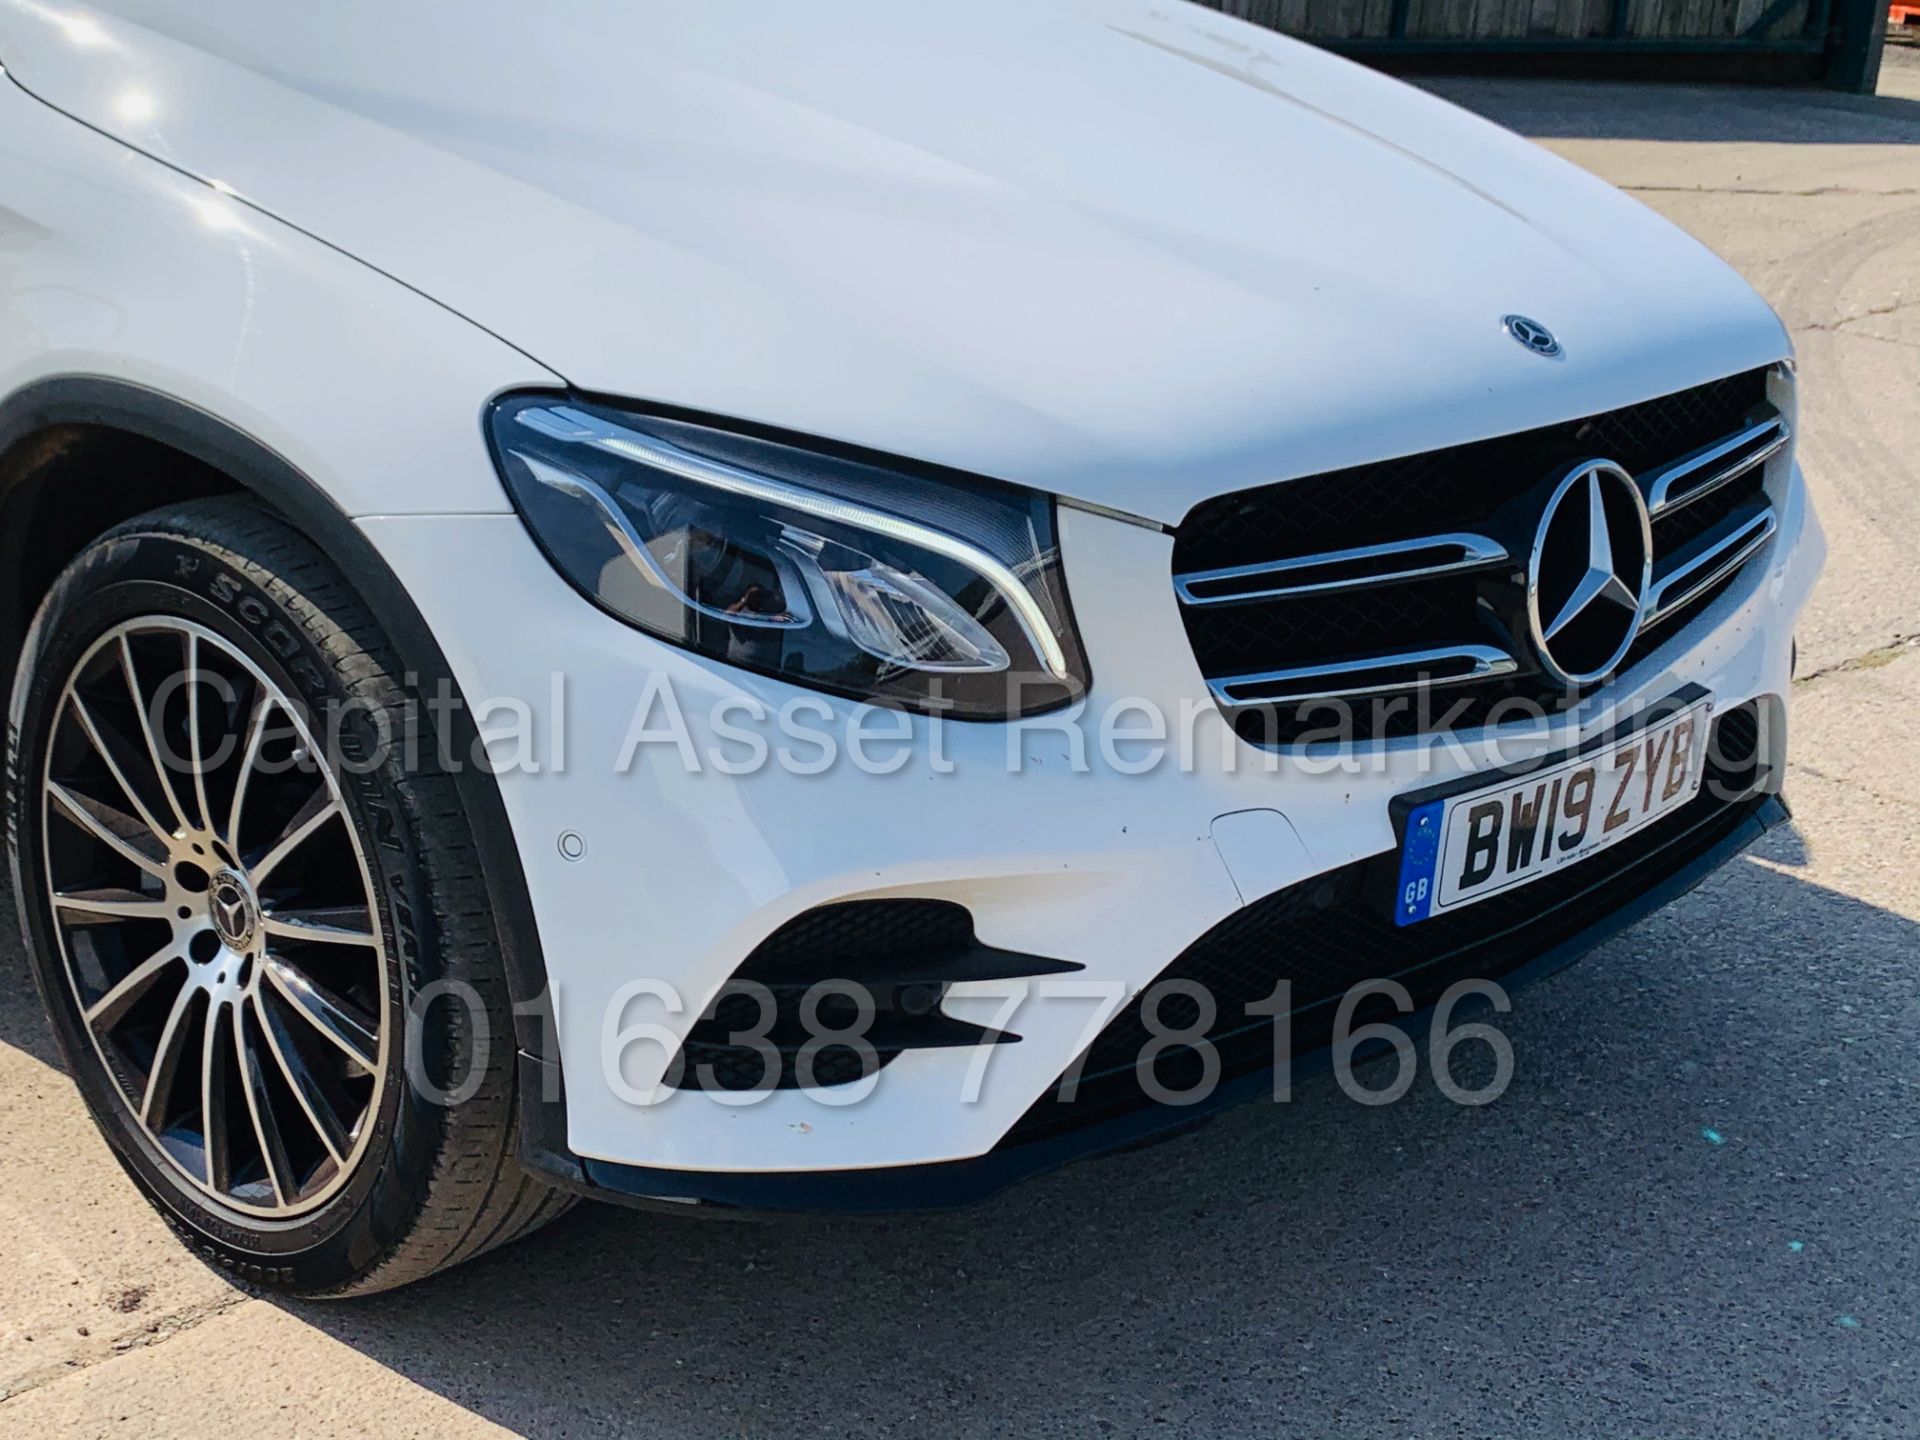 (On Sale) MERCEDES-BENZ GLC 250 *AMG - NIGHT EDITION* SUV (2019) '9G TRONIC - 4-MATIC' *HUGE SPEC* - Image 16 of 53